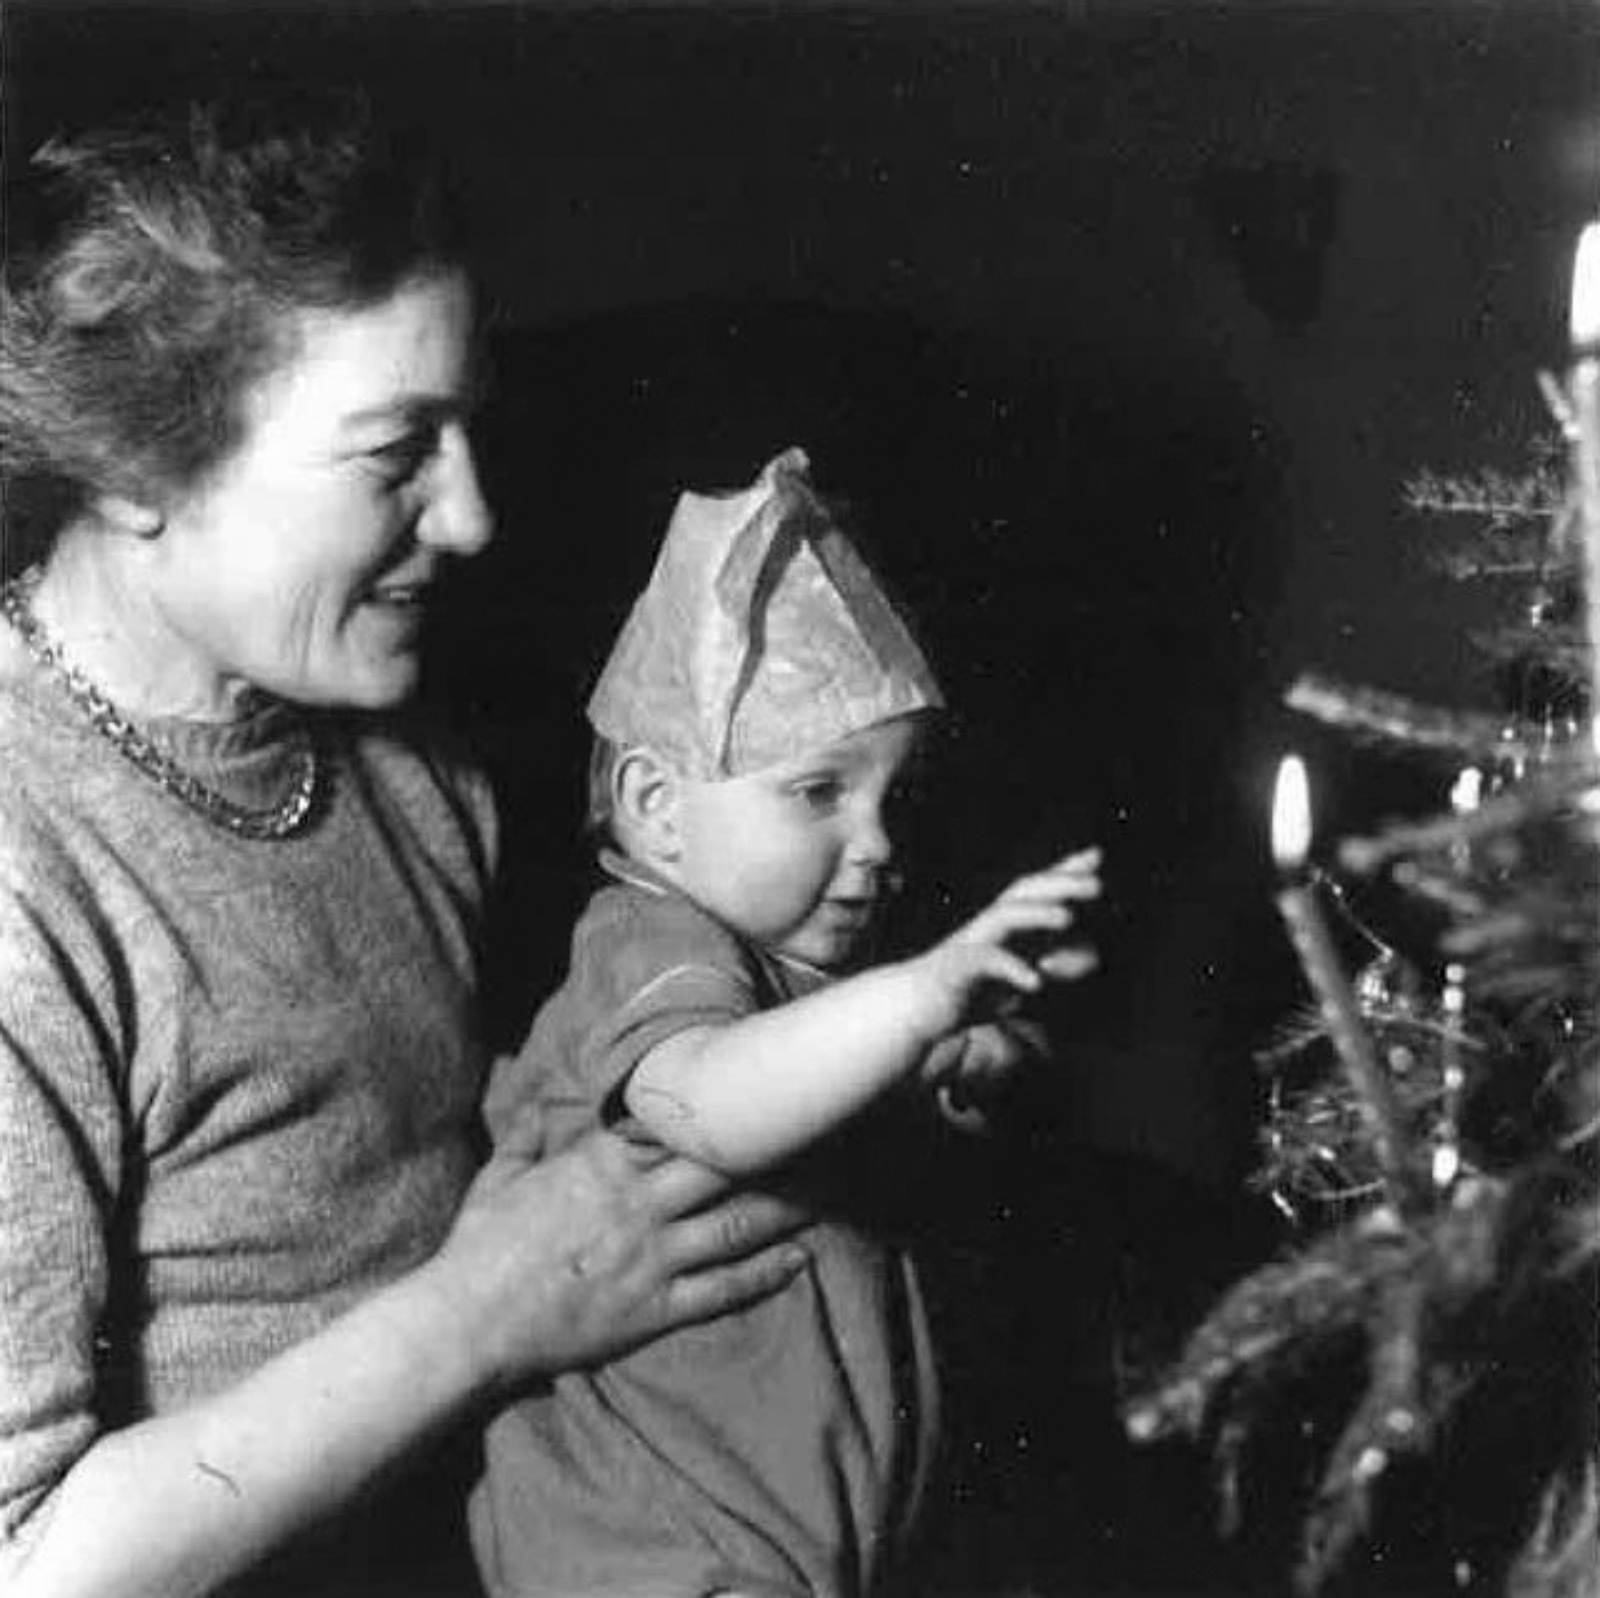 Ian Buruma with his grandmother Win Schlesinger at her house in Berkshire, 1953